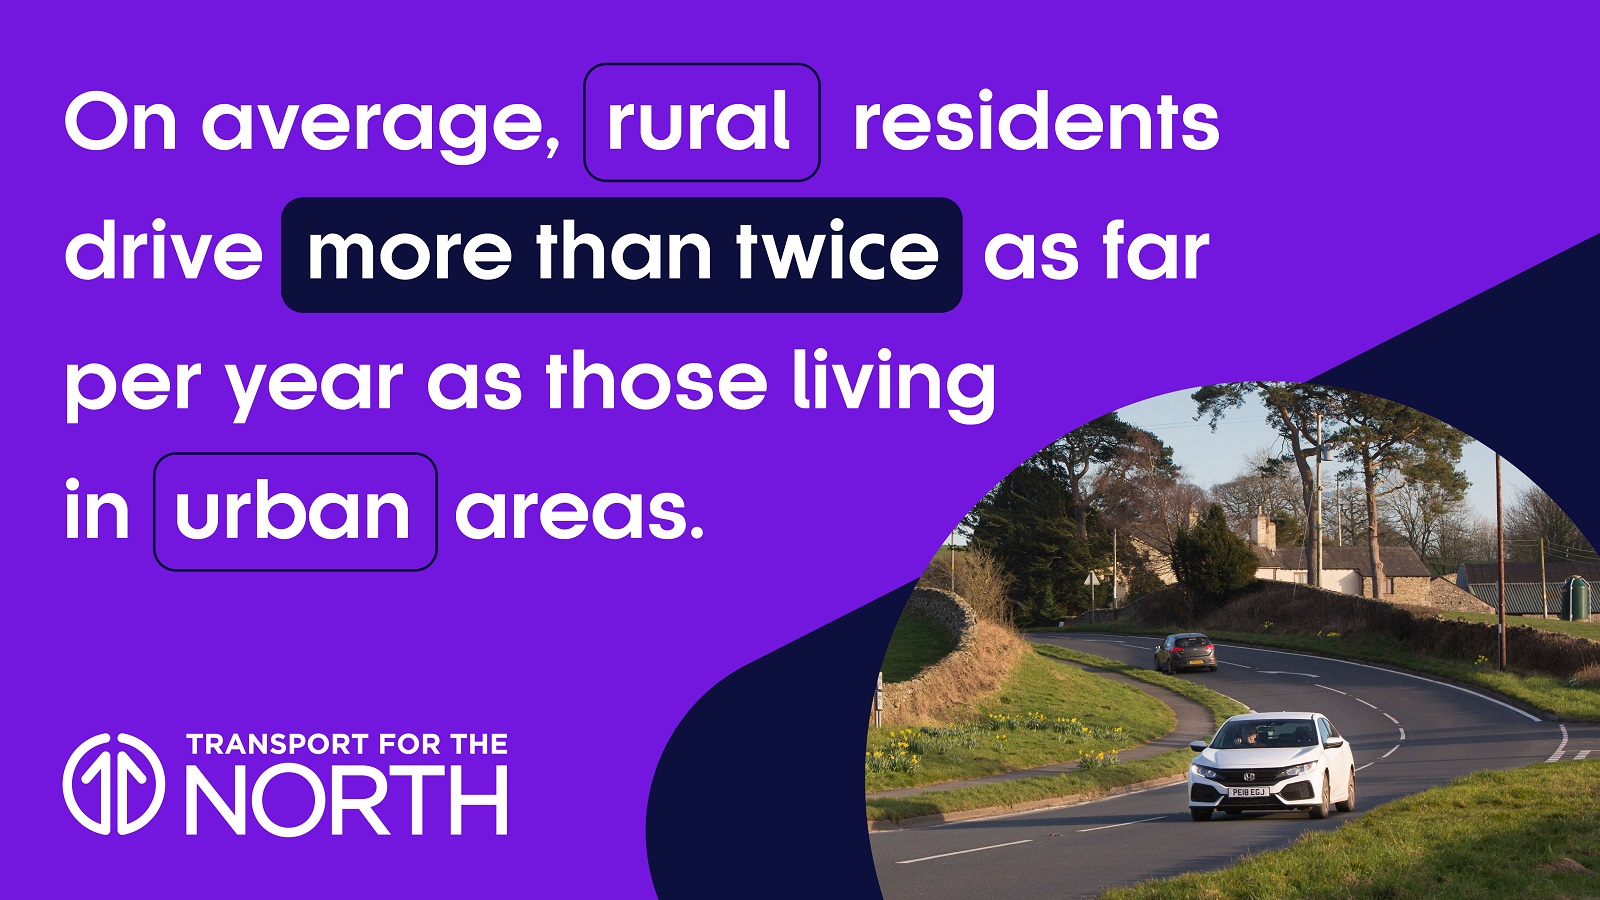 On average, rural residents drive more than twice as far per year as those living in urban areas